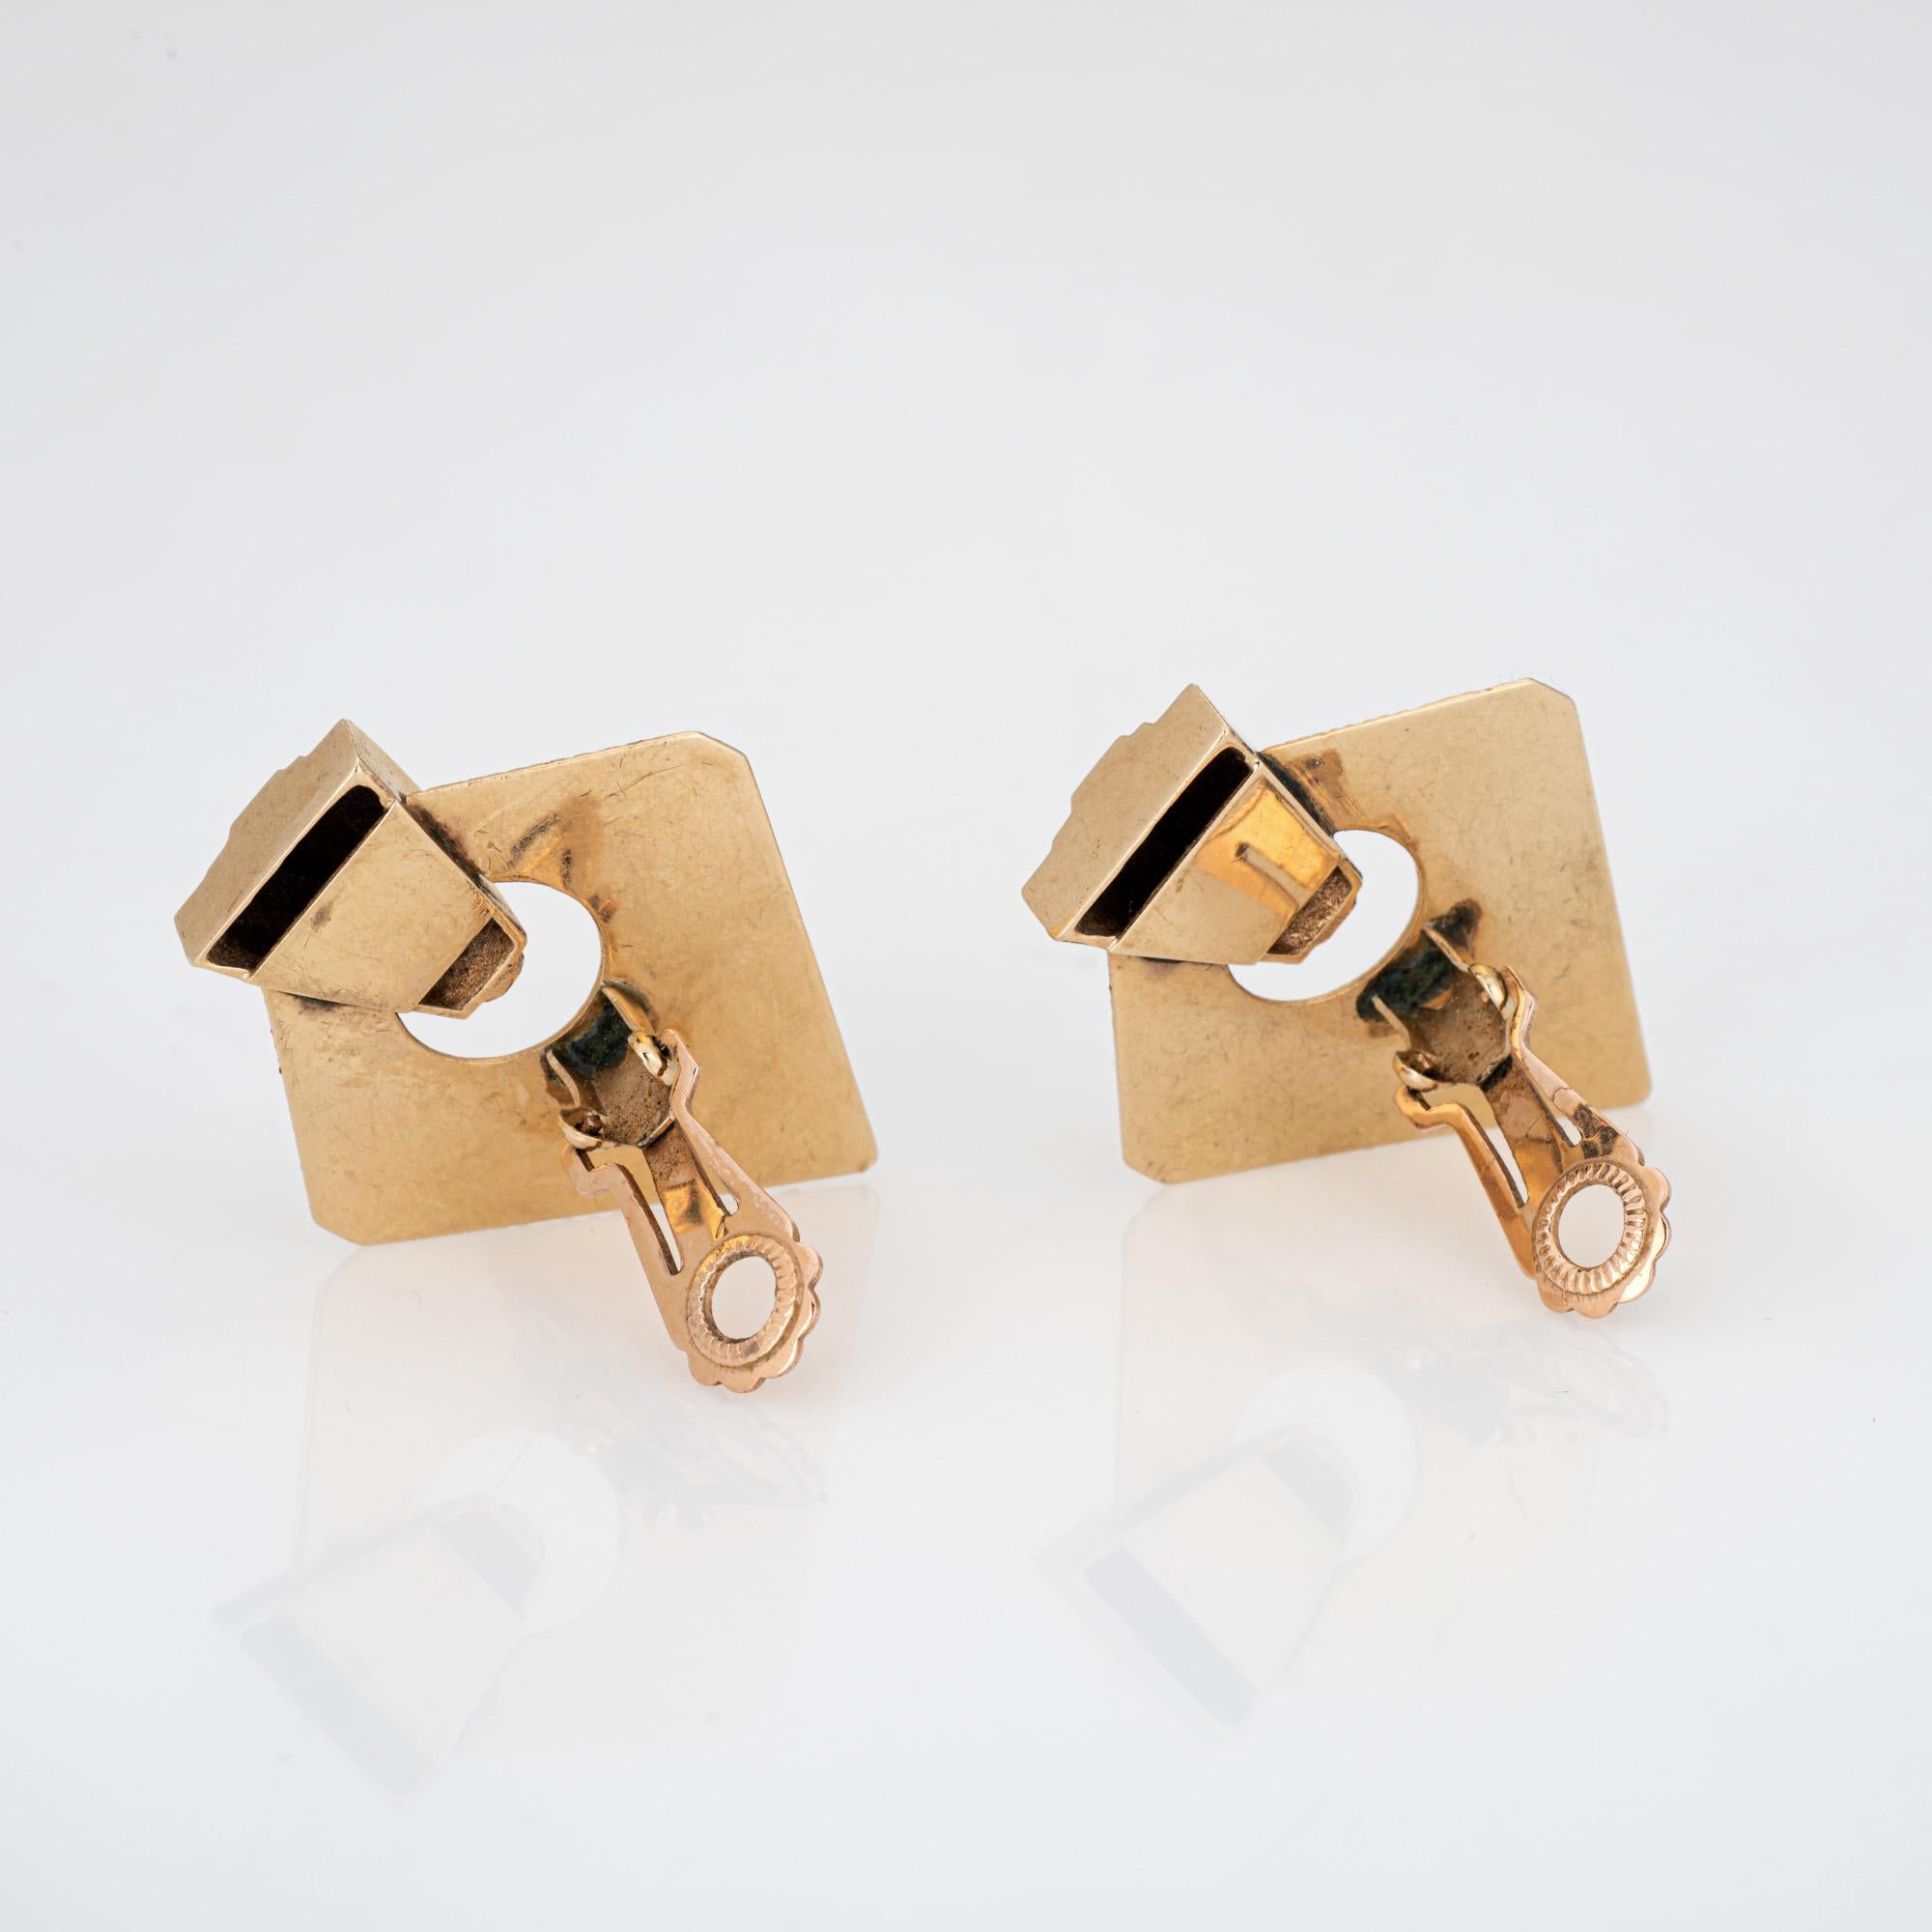 Elegant pair of retro estate crafted in 14k white gold (circa 1940s to 1950s). 

The stylish earrings are designed in a triangular motif, with a ridged finish. Measuring 1 1/2 inches in length, the earrings make a bold statement, perfect for day and